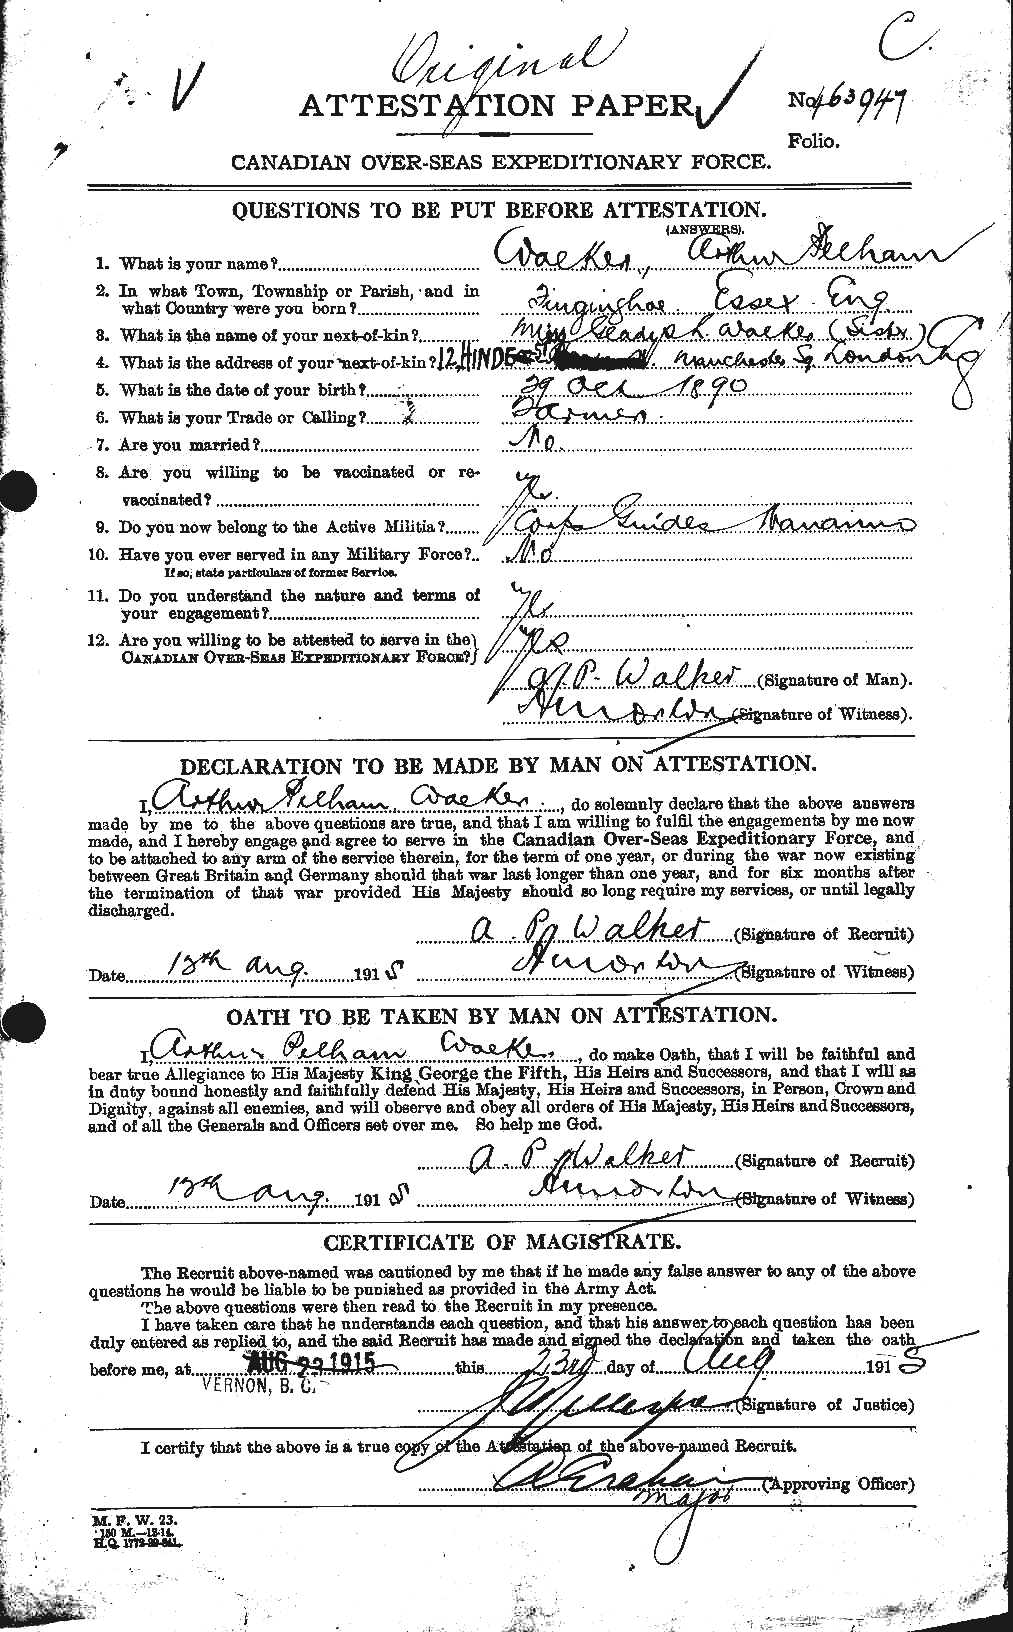 Personnel Records of the First World War - CEF 651114a